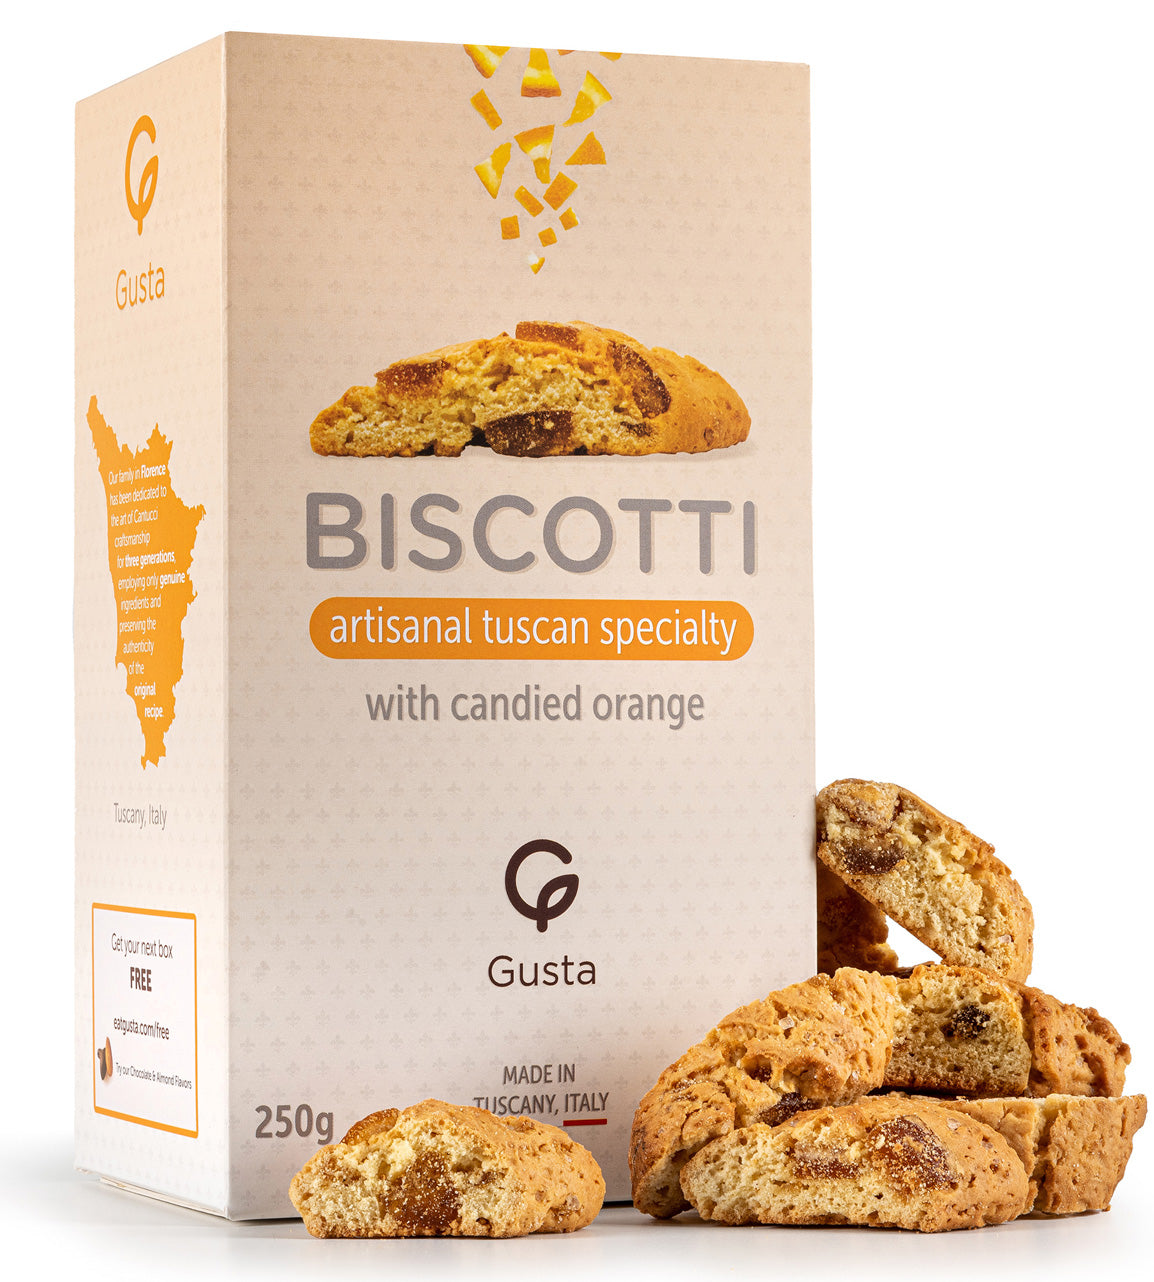 Gusta Authentic Biscotti Cookies Made in Tuscany, Italy - Orange